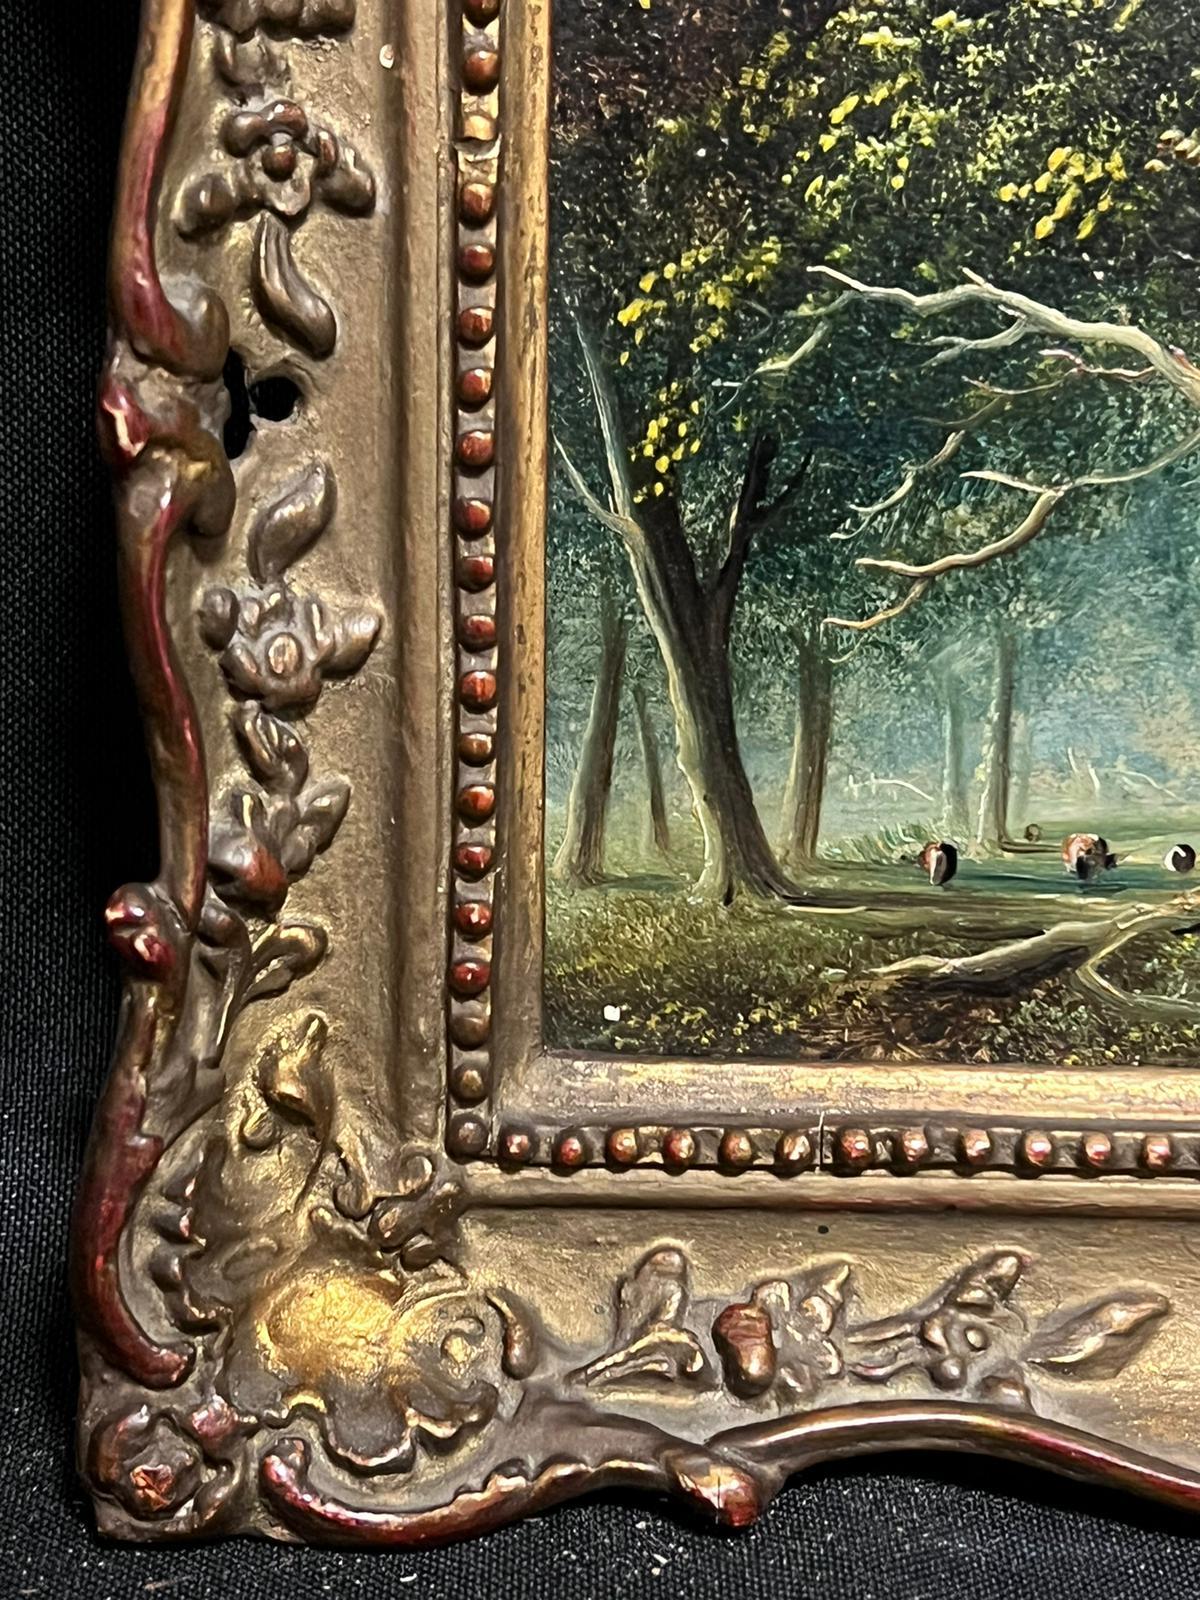 The Woodland Glade
British School, circa 1870's period
oil on board, framed
framed: 7 x 8.5 inches
board: 5 x 6.25 inches
provenance: private collection, England
condition: very good and sound condition, please note the frame has a few moulding/